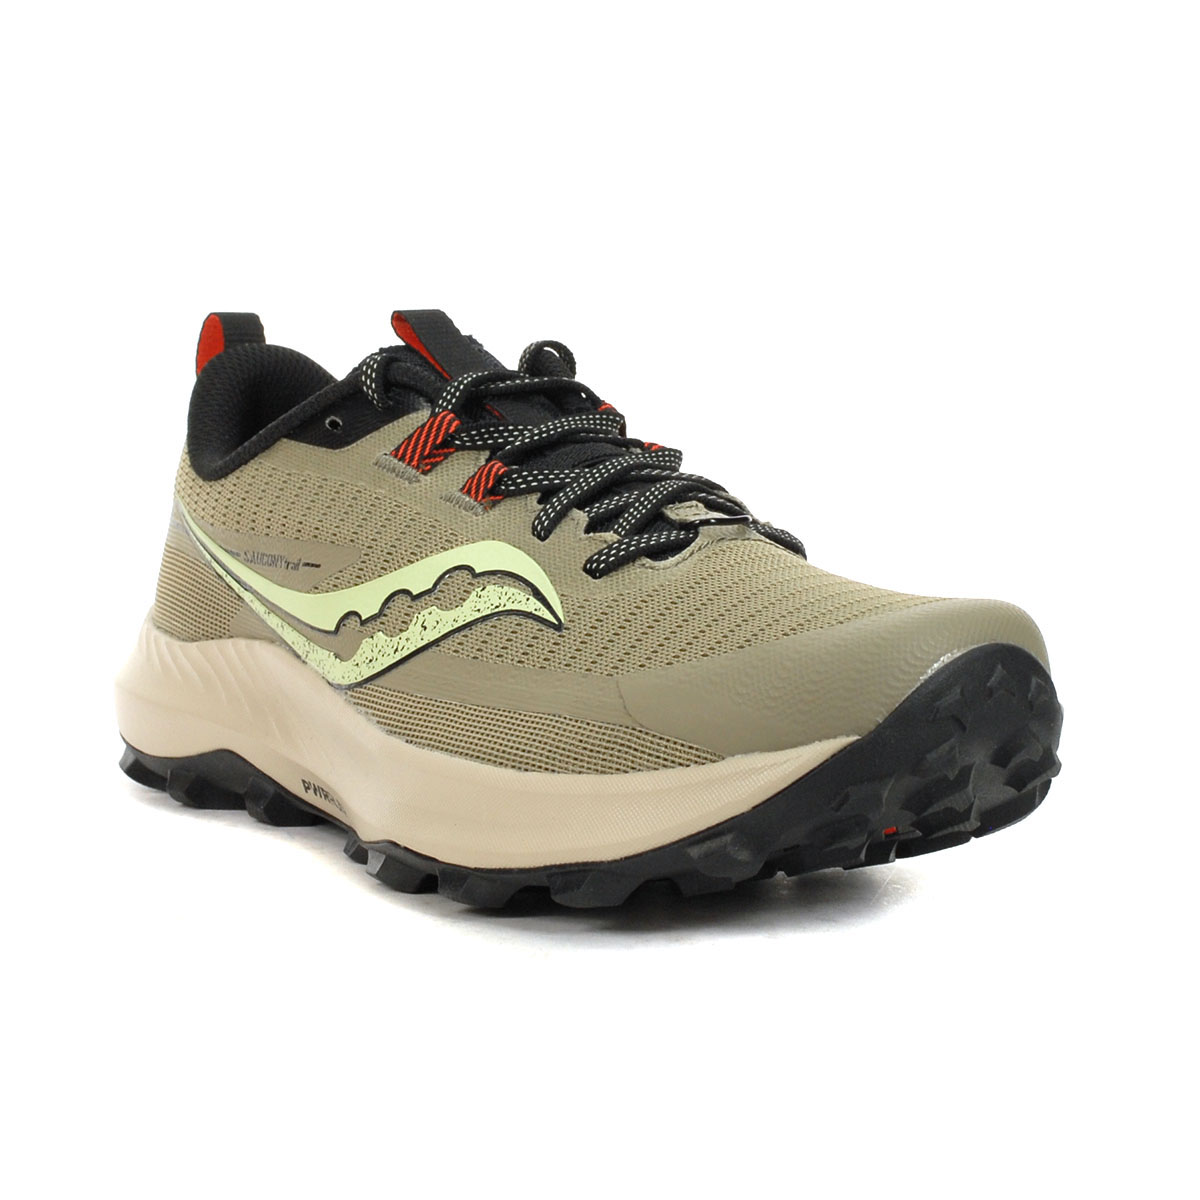 Saucony Men's Peregrine 13 Coffee/Black Trail Running Shoes S20838-31 ...